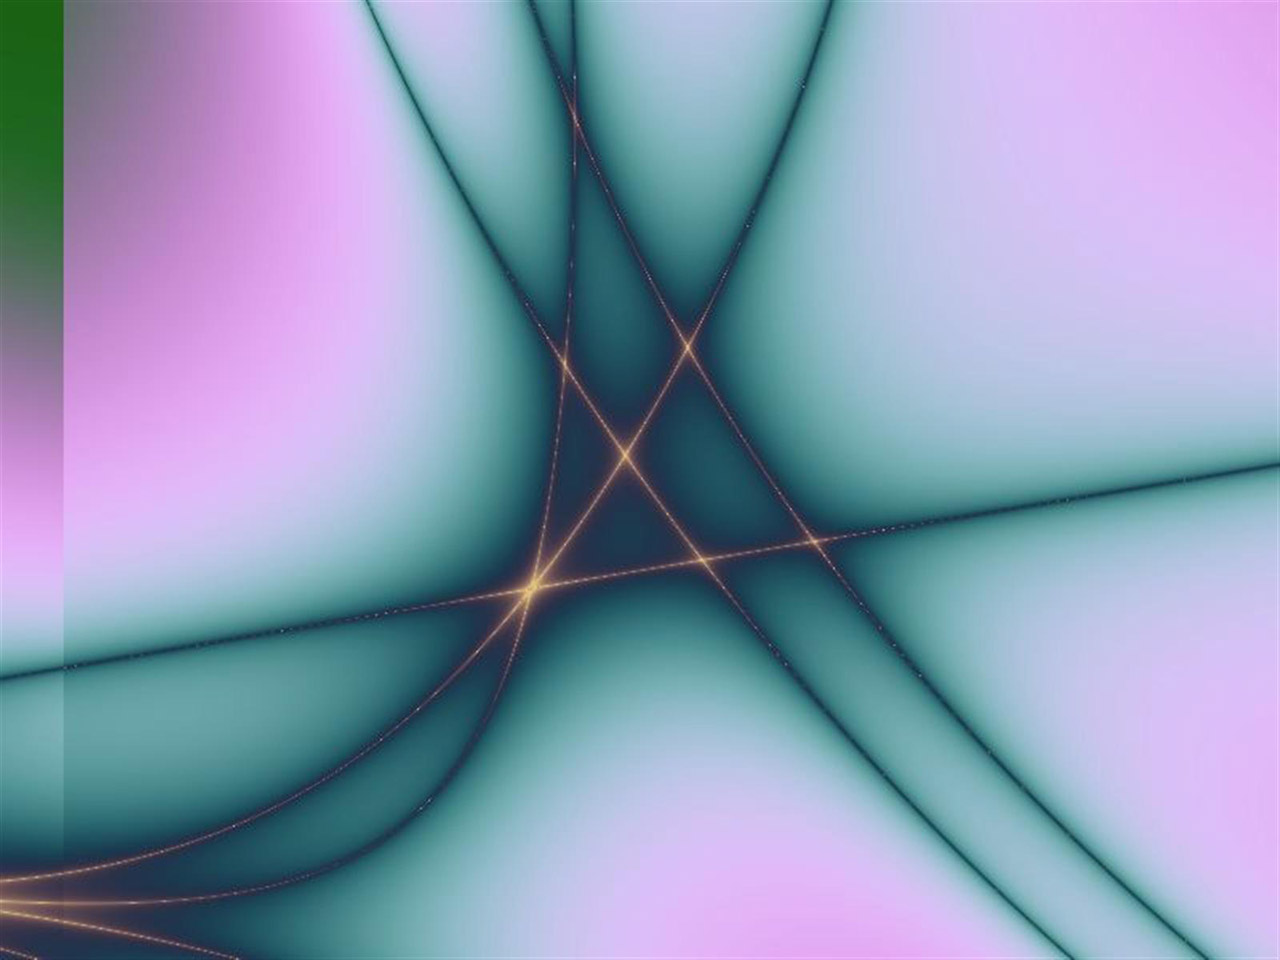 Fractal of lines in green on pink